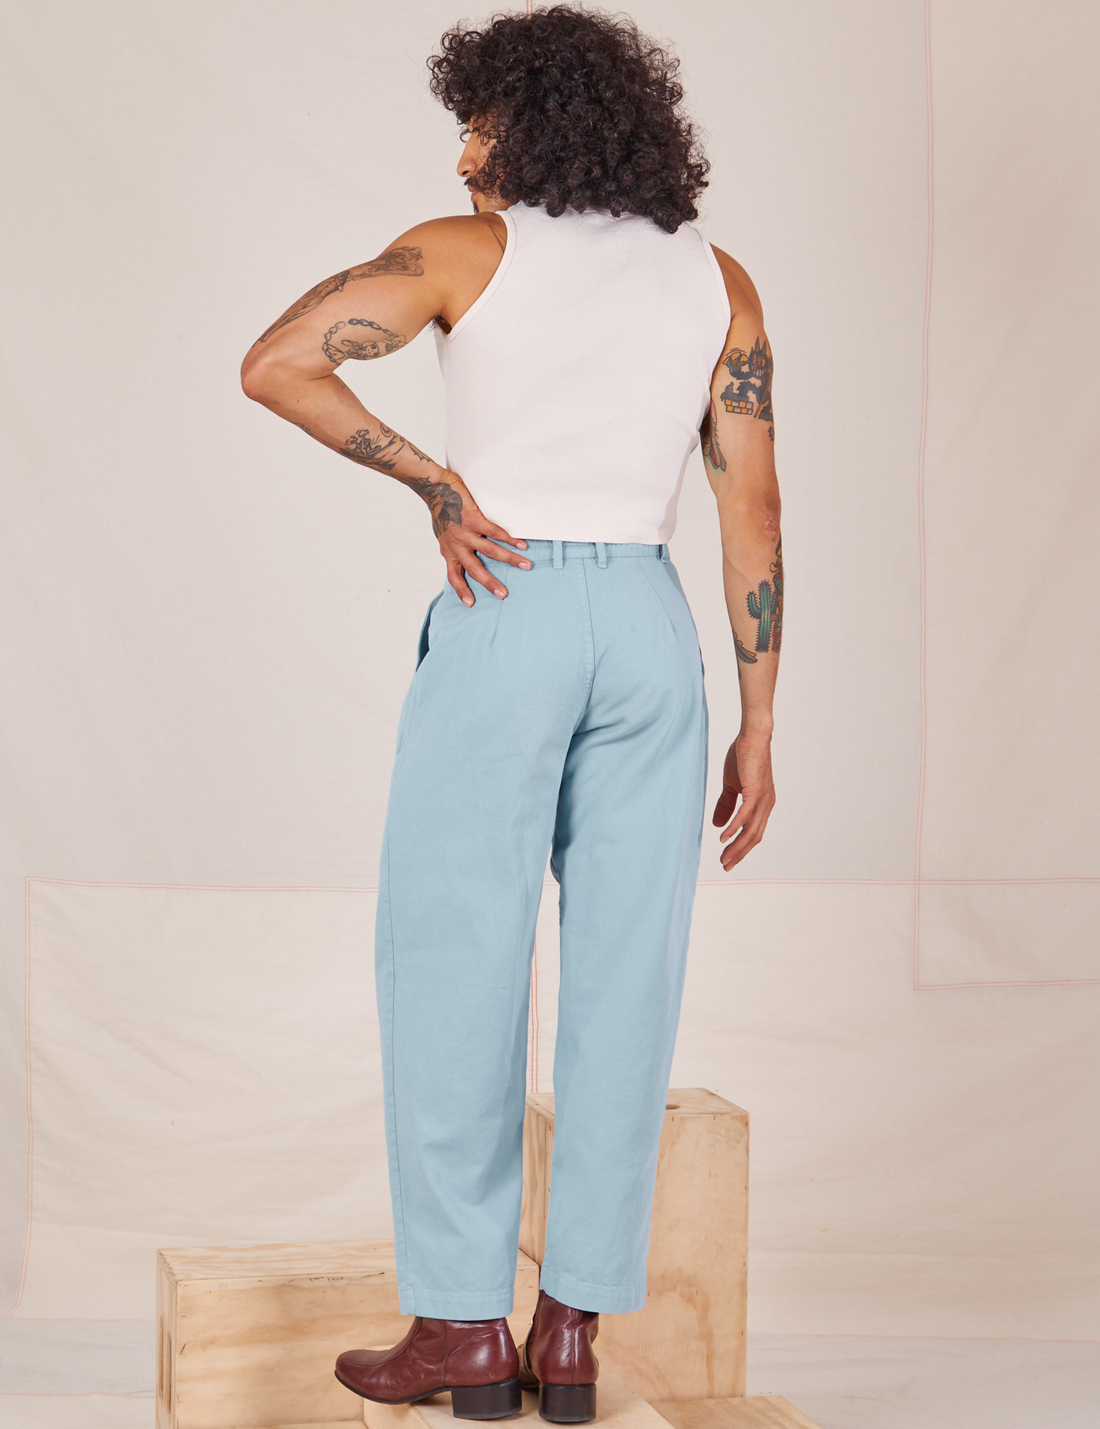 Back view of Heavyweight Trousers in Baby Blue and vintage off-white Sleeveless Turtleneck worn by Jesse